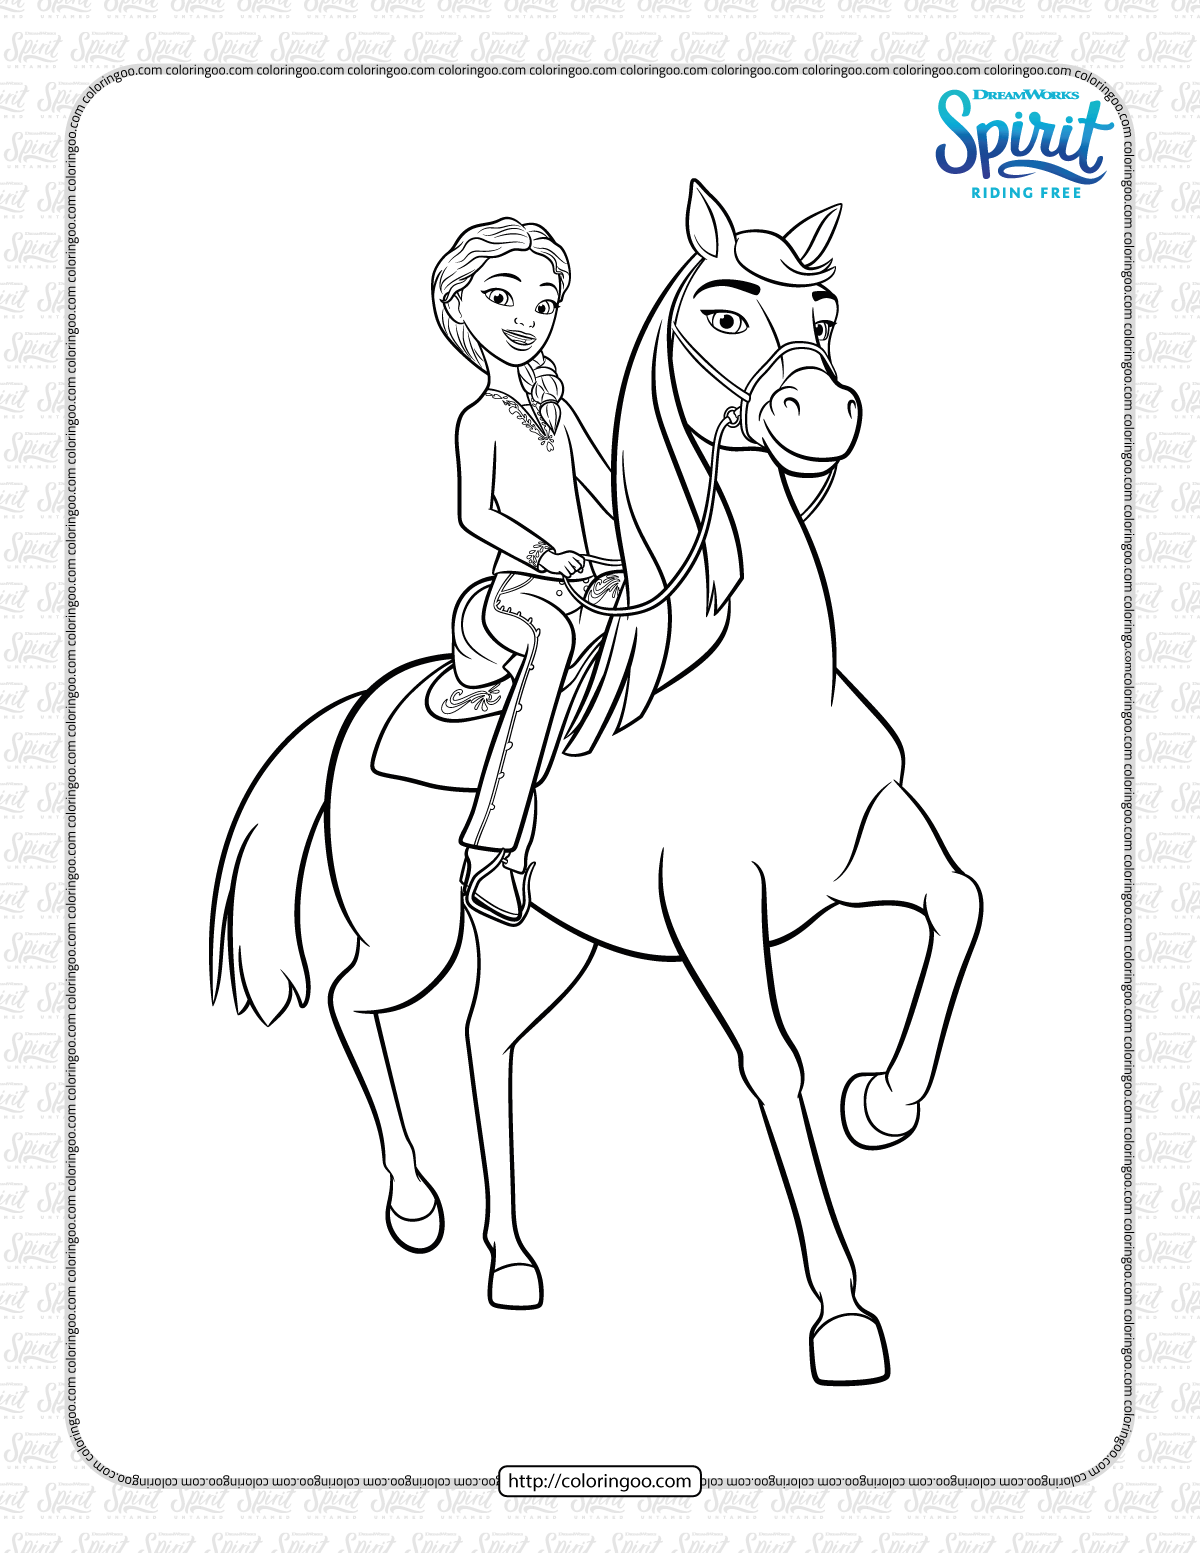 pru and chica linda pdf coloring pages